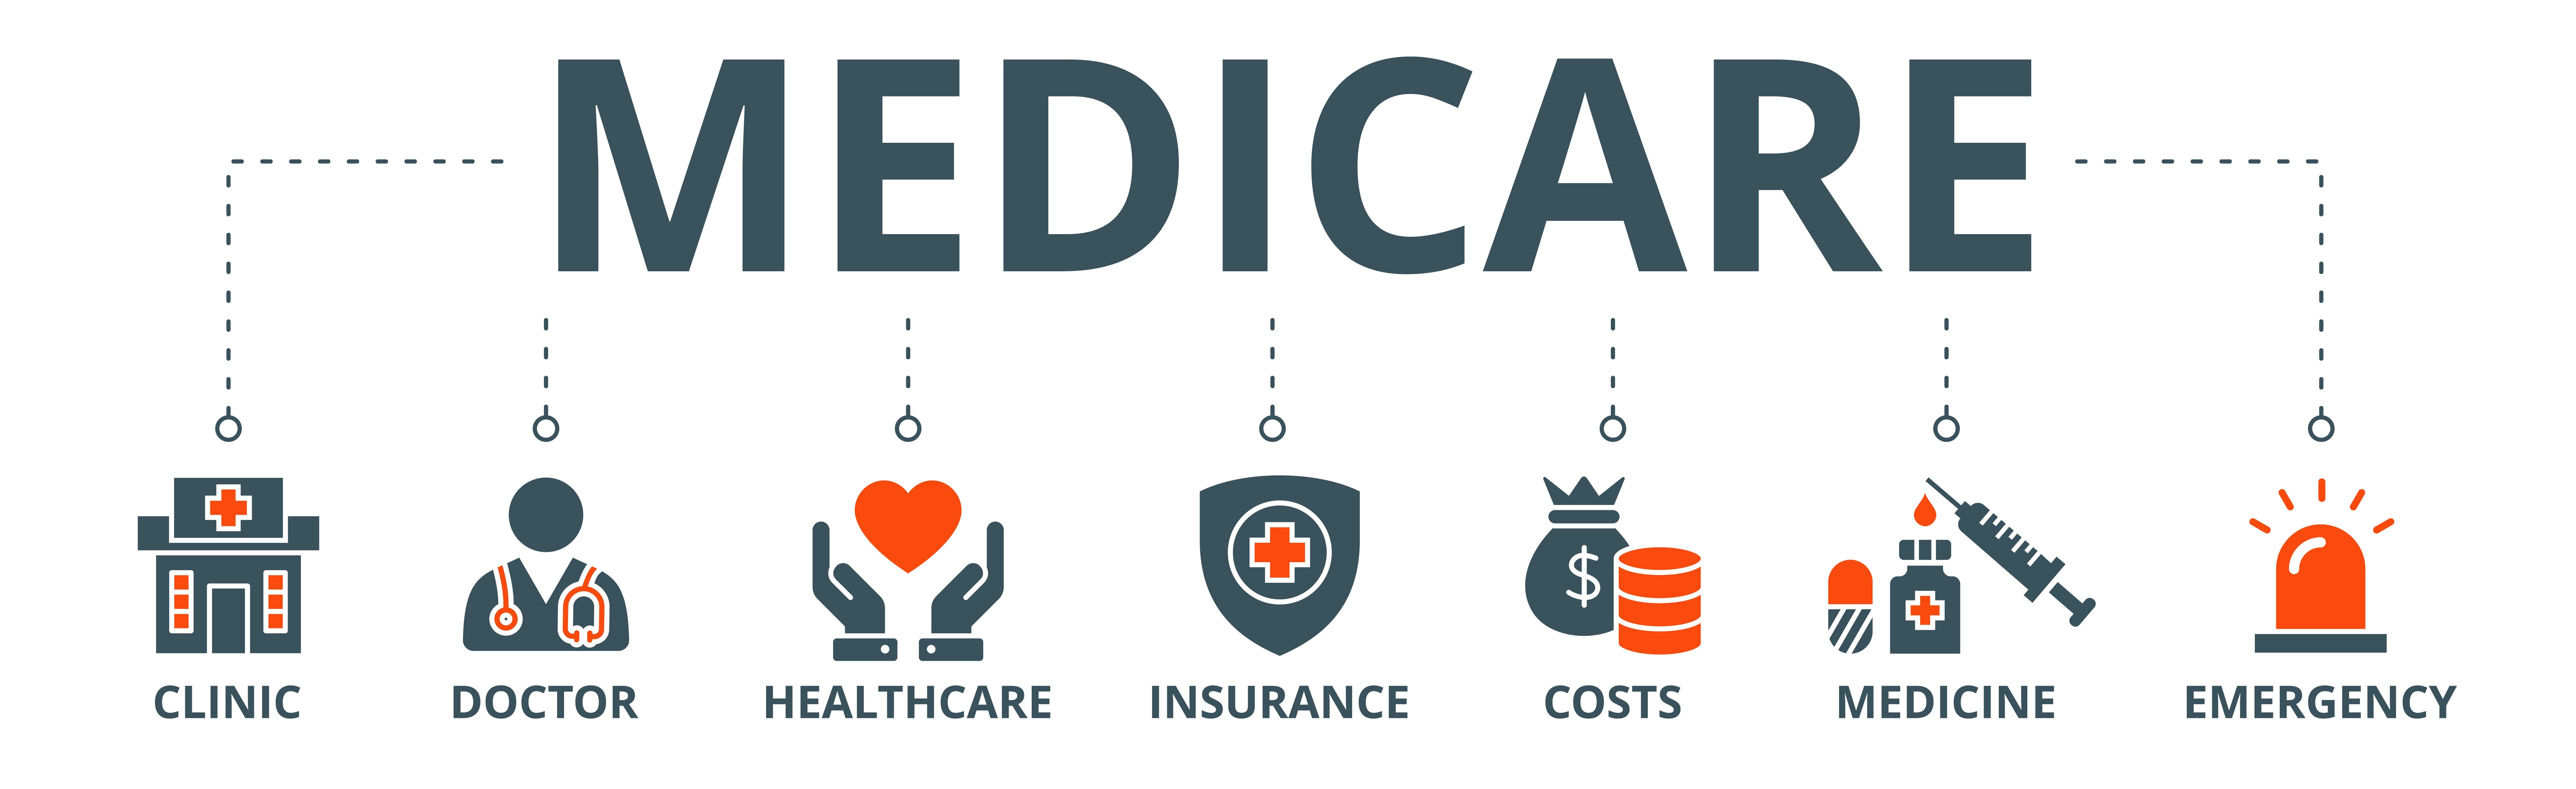 words medicare in different color letters with dotted lines to various areas covered: doctors, clinics and icons of each